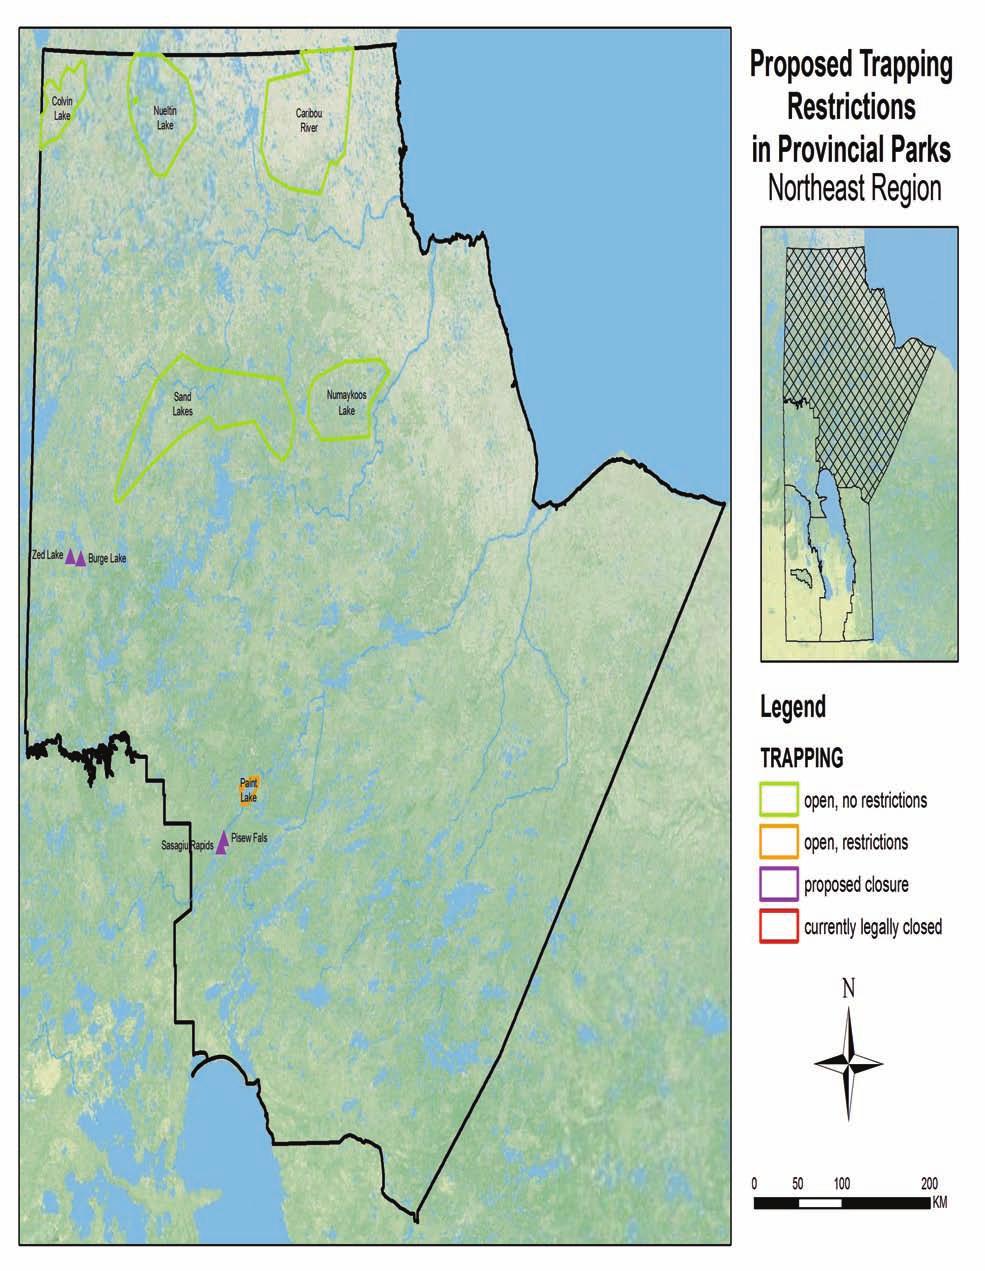 Proposed Trapping Restrictions in Provincial Parks NORTHEAST